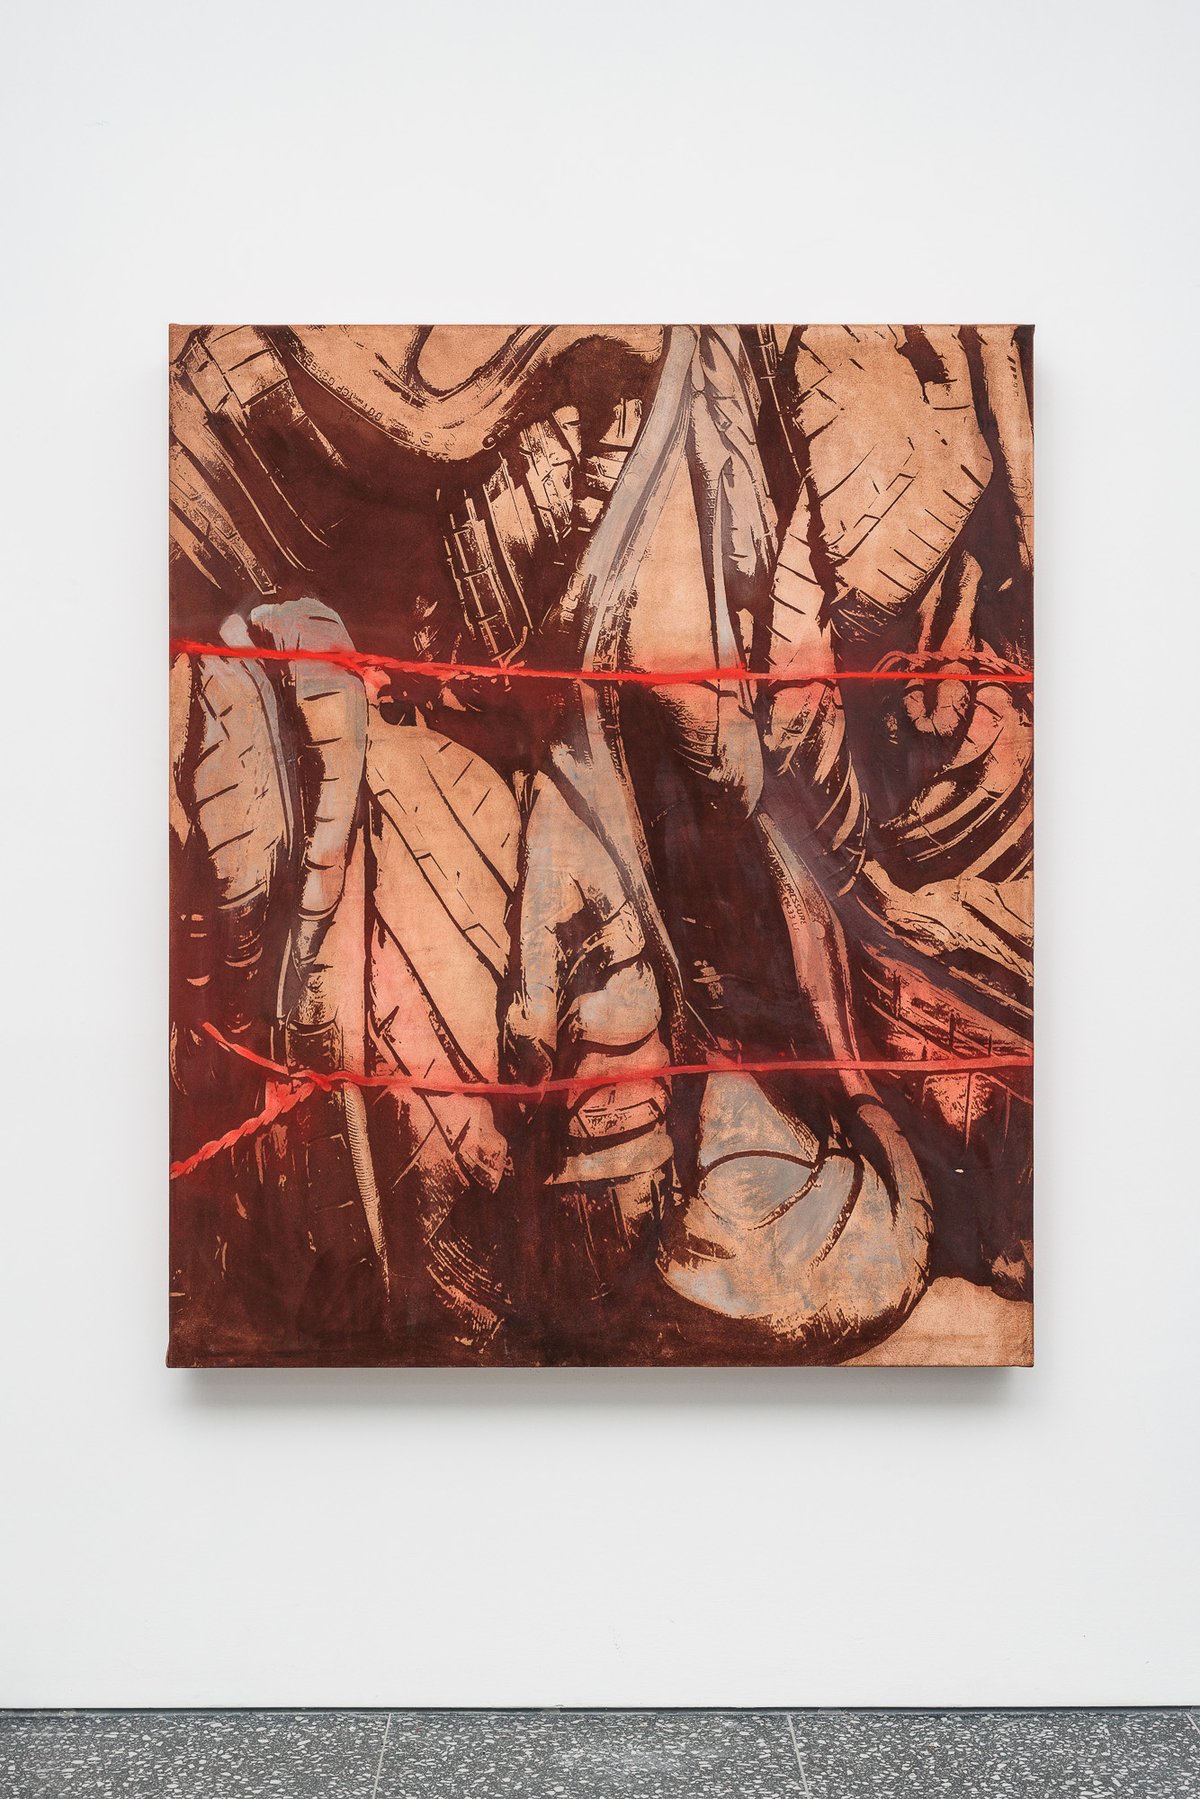 Lena HenkeCombustions 22 [Penetration damage], 2024Laser etched leather, pigment on wooden panel150 x 125 x 15 cm